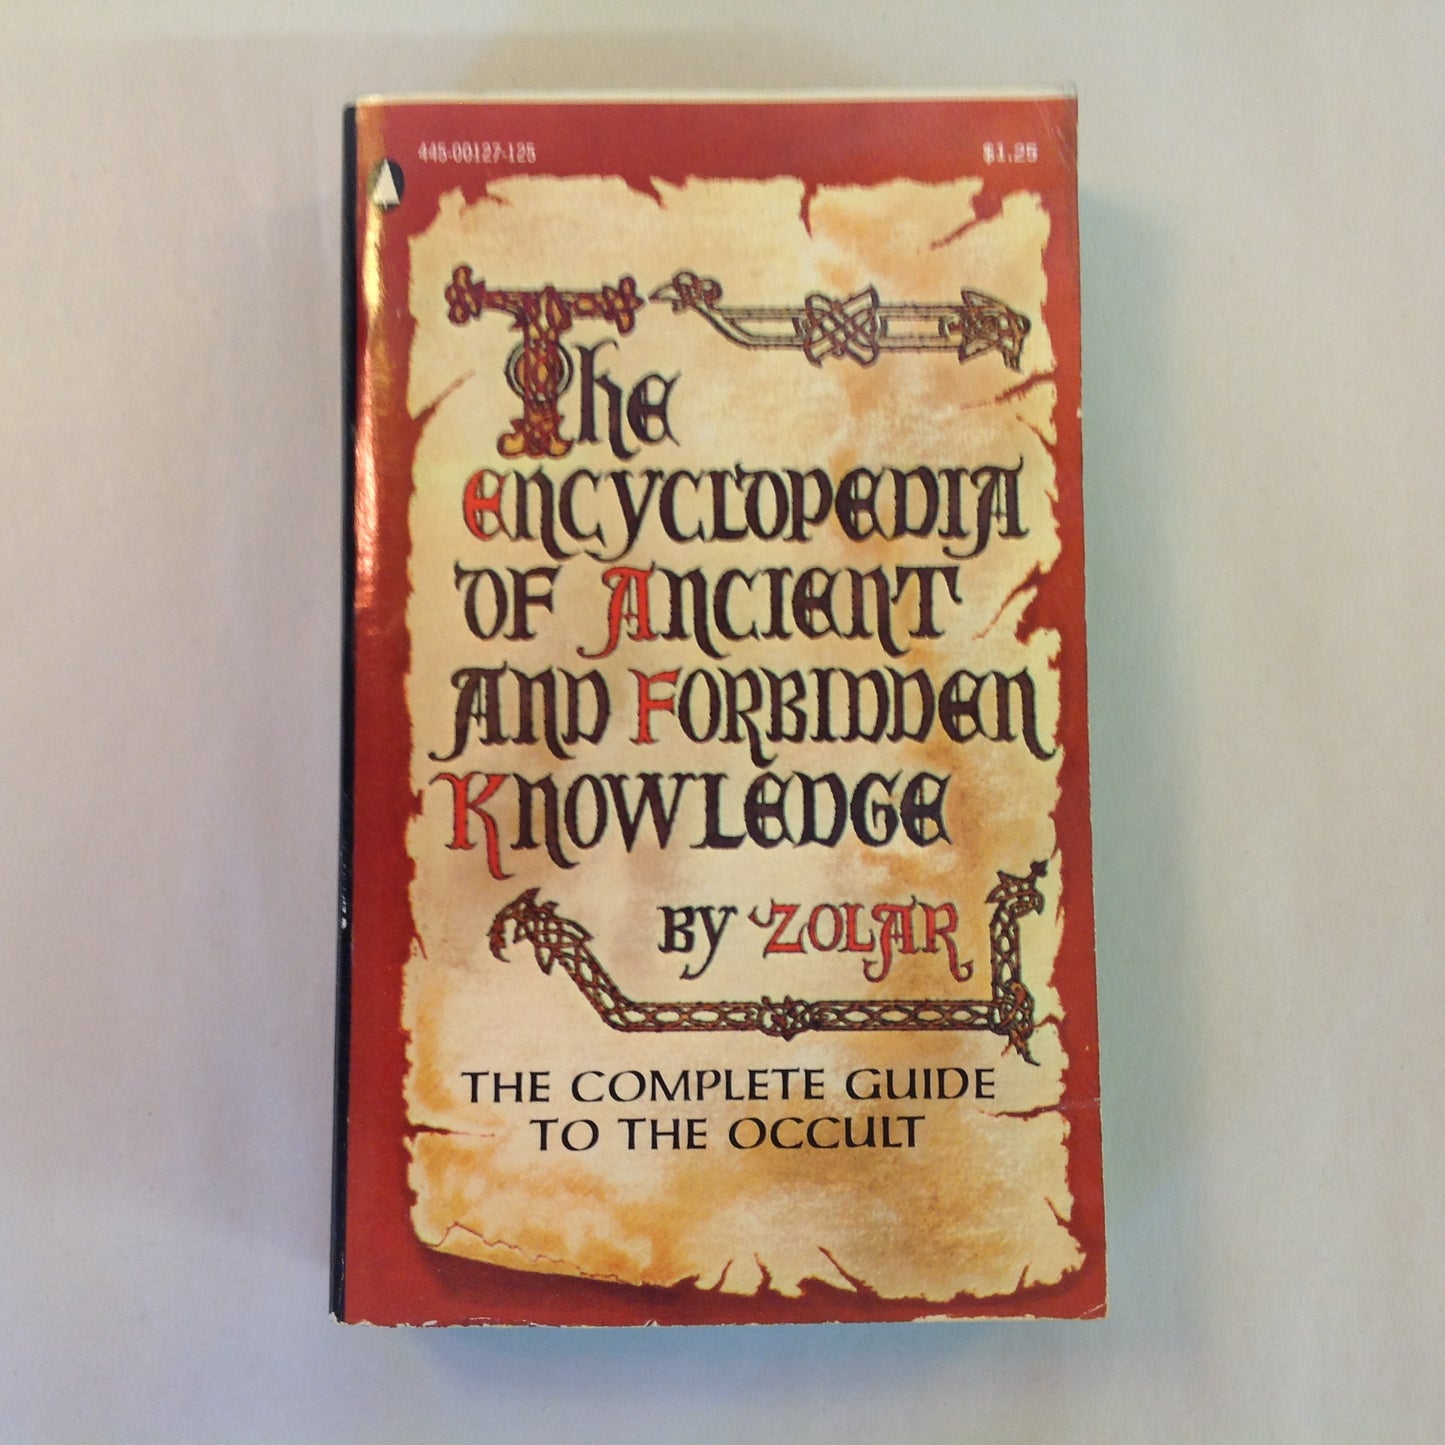 Vintage 1970 Mass Market Paperback The Encyclopedia of Ancient and Forbidden Knowledge: The Complete Guide to the Occult Zolar